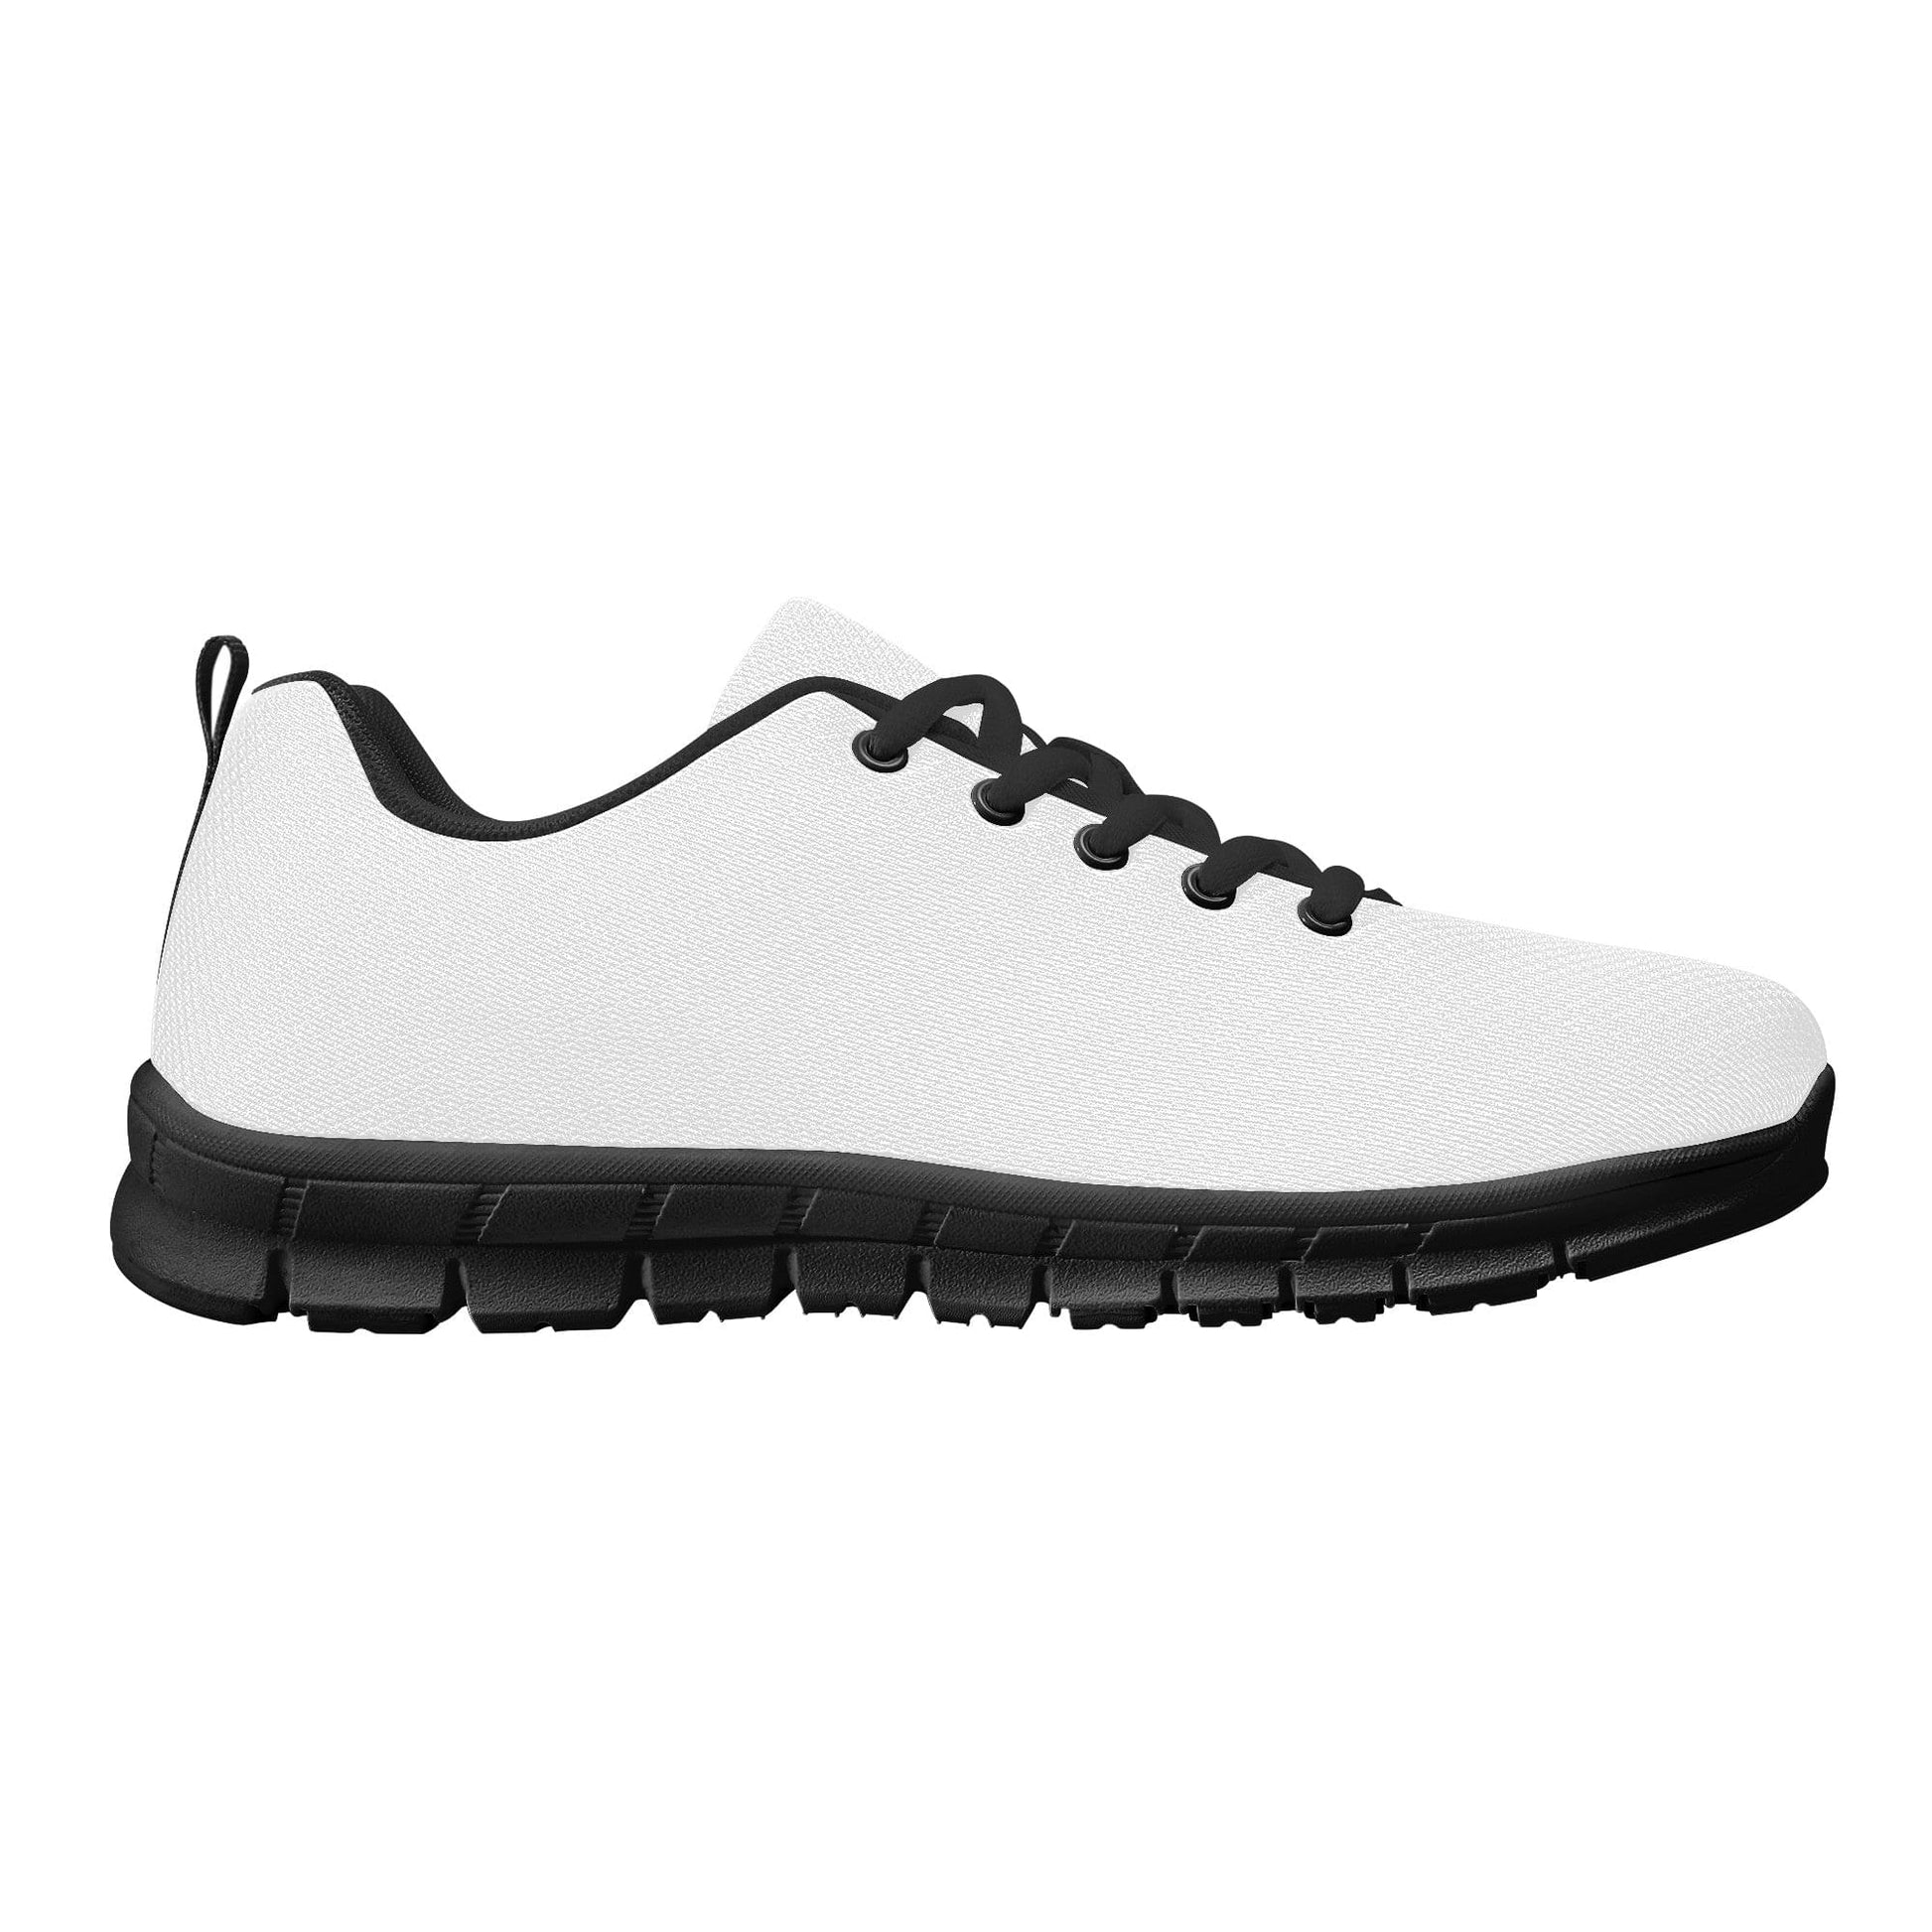 Custom Running Shoes - Black D23 Colloid Colors 